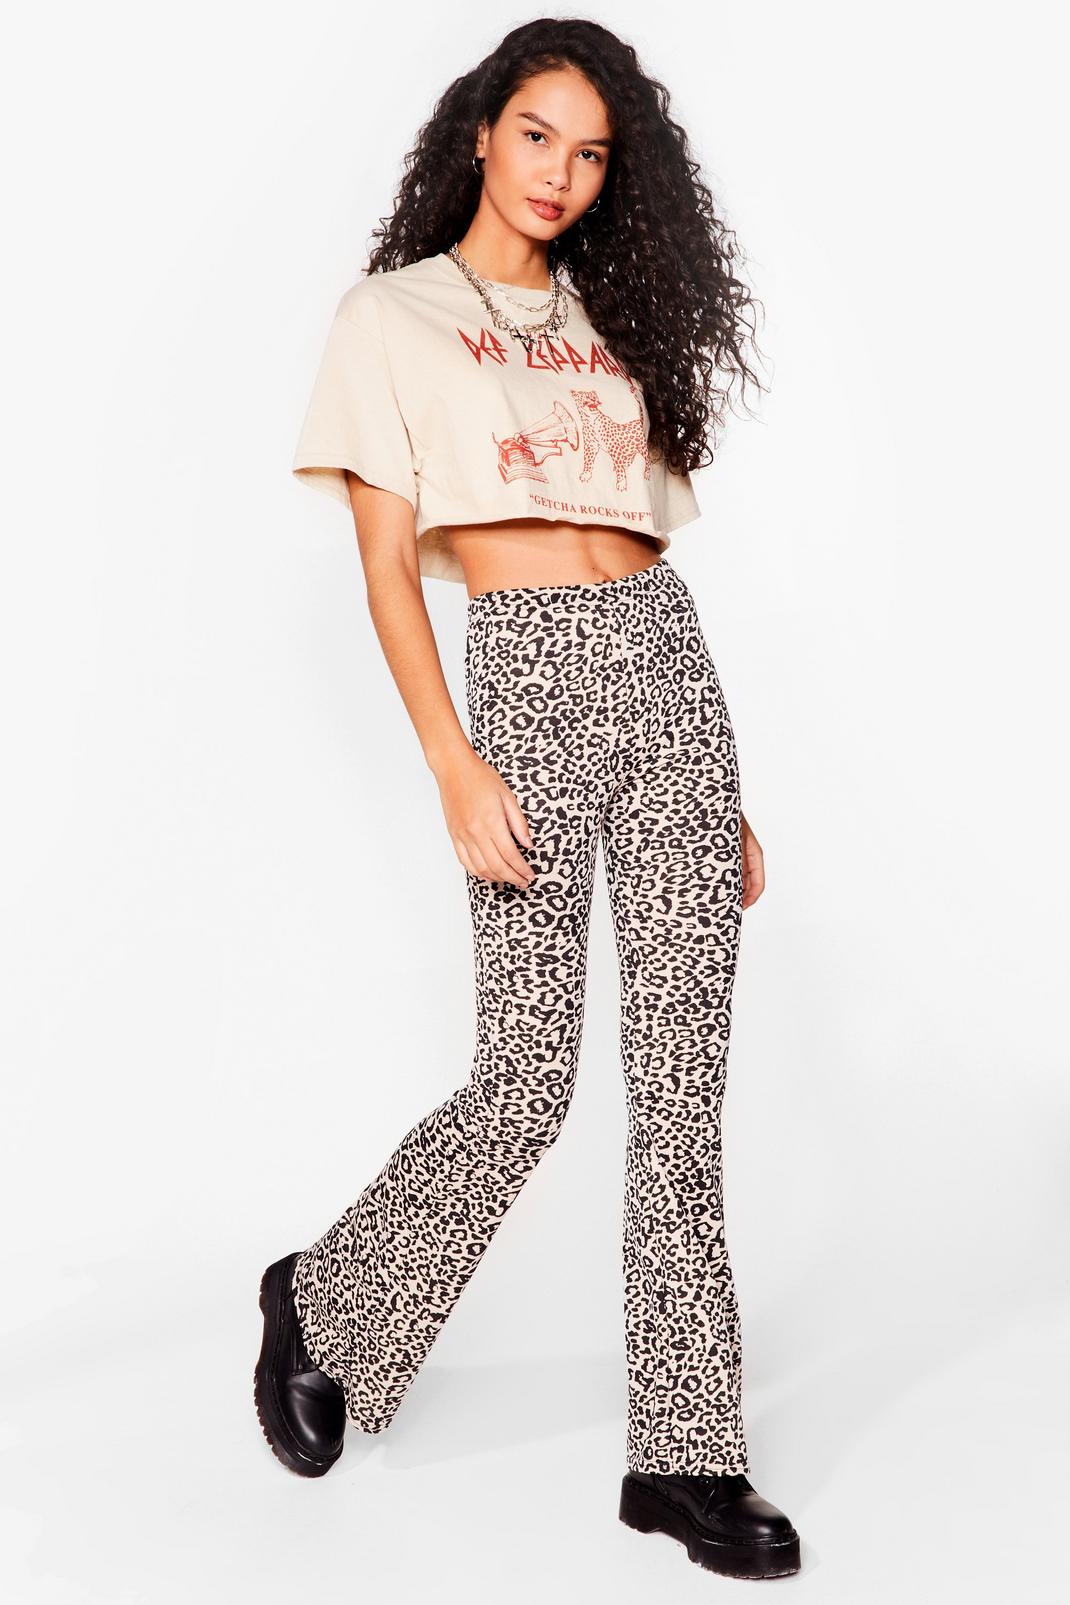 Handle With Flare Leopard High-Waisted Pants | Nasty Gal